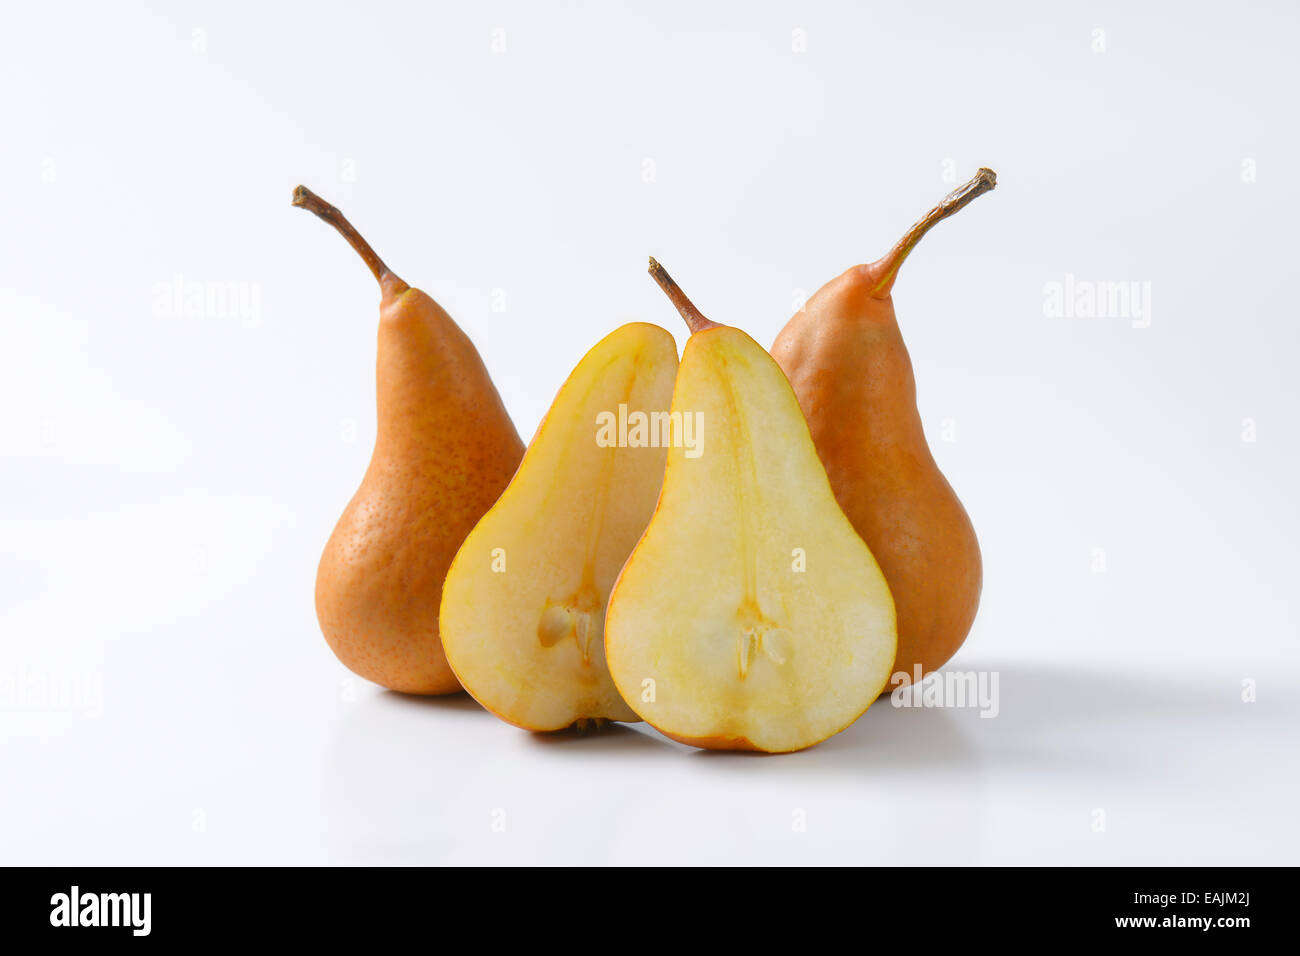 European pears, whole and cut in halves Stock Photo